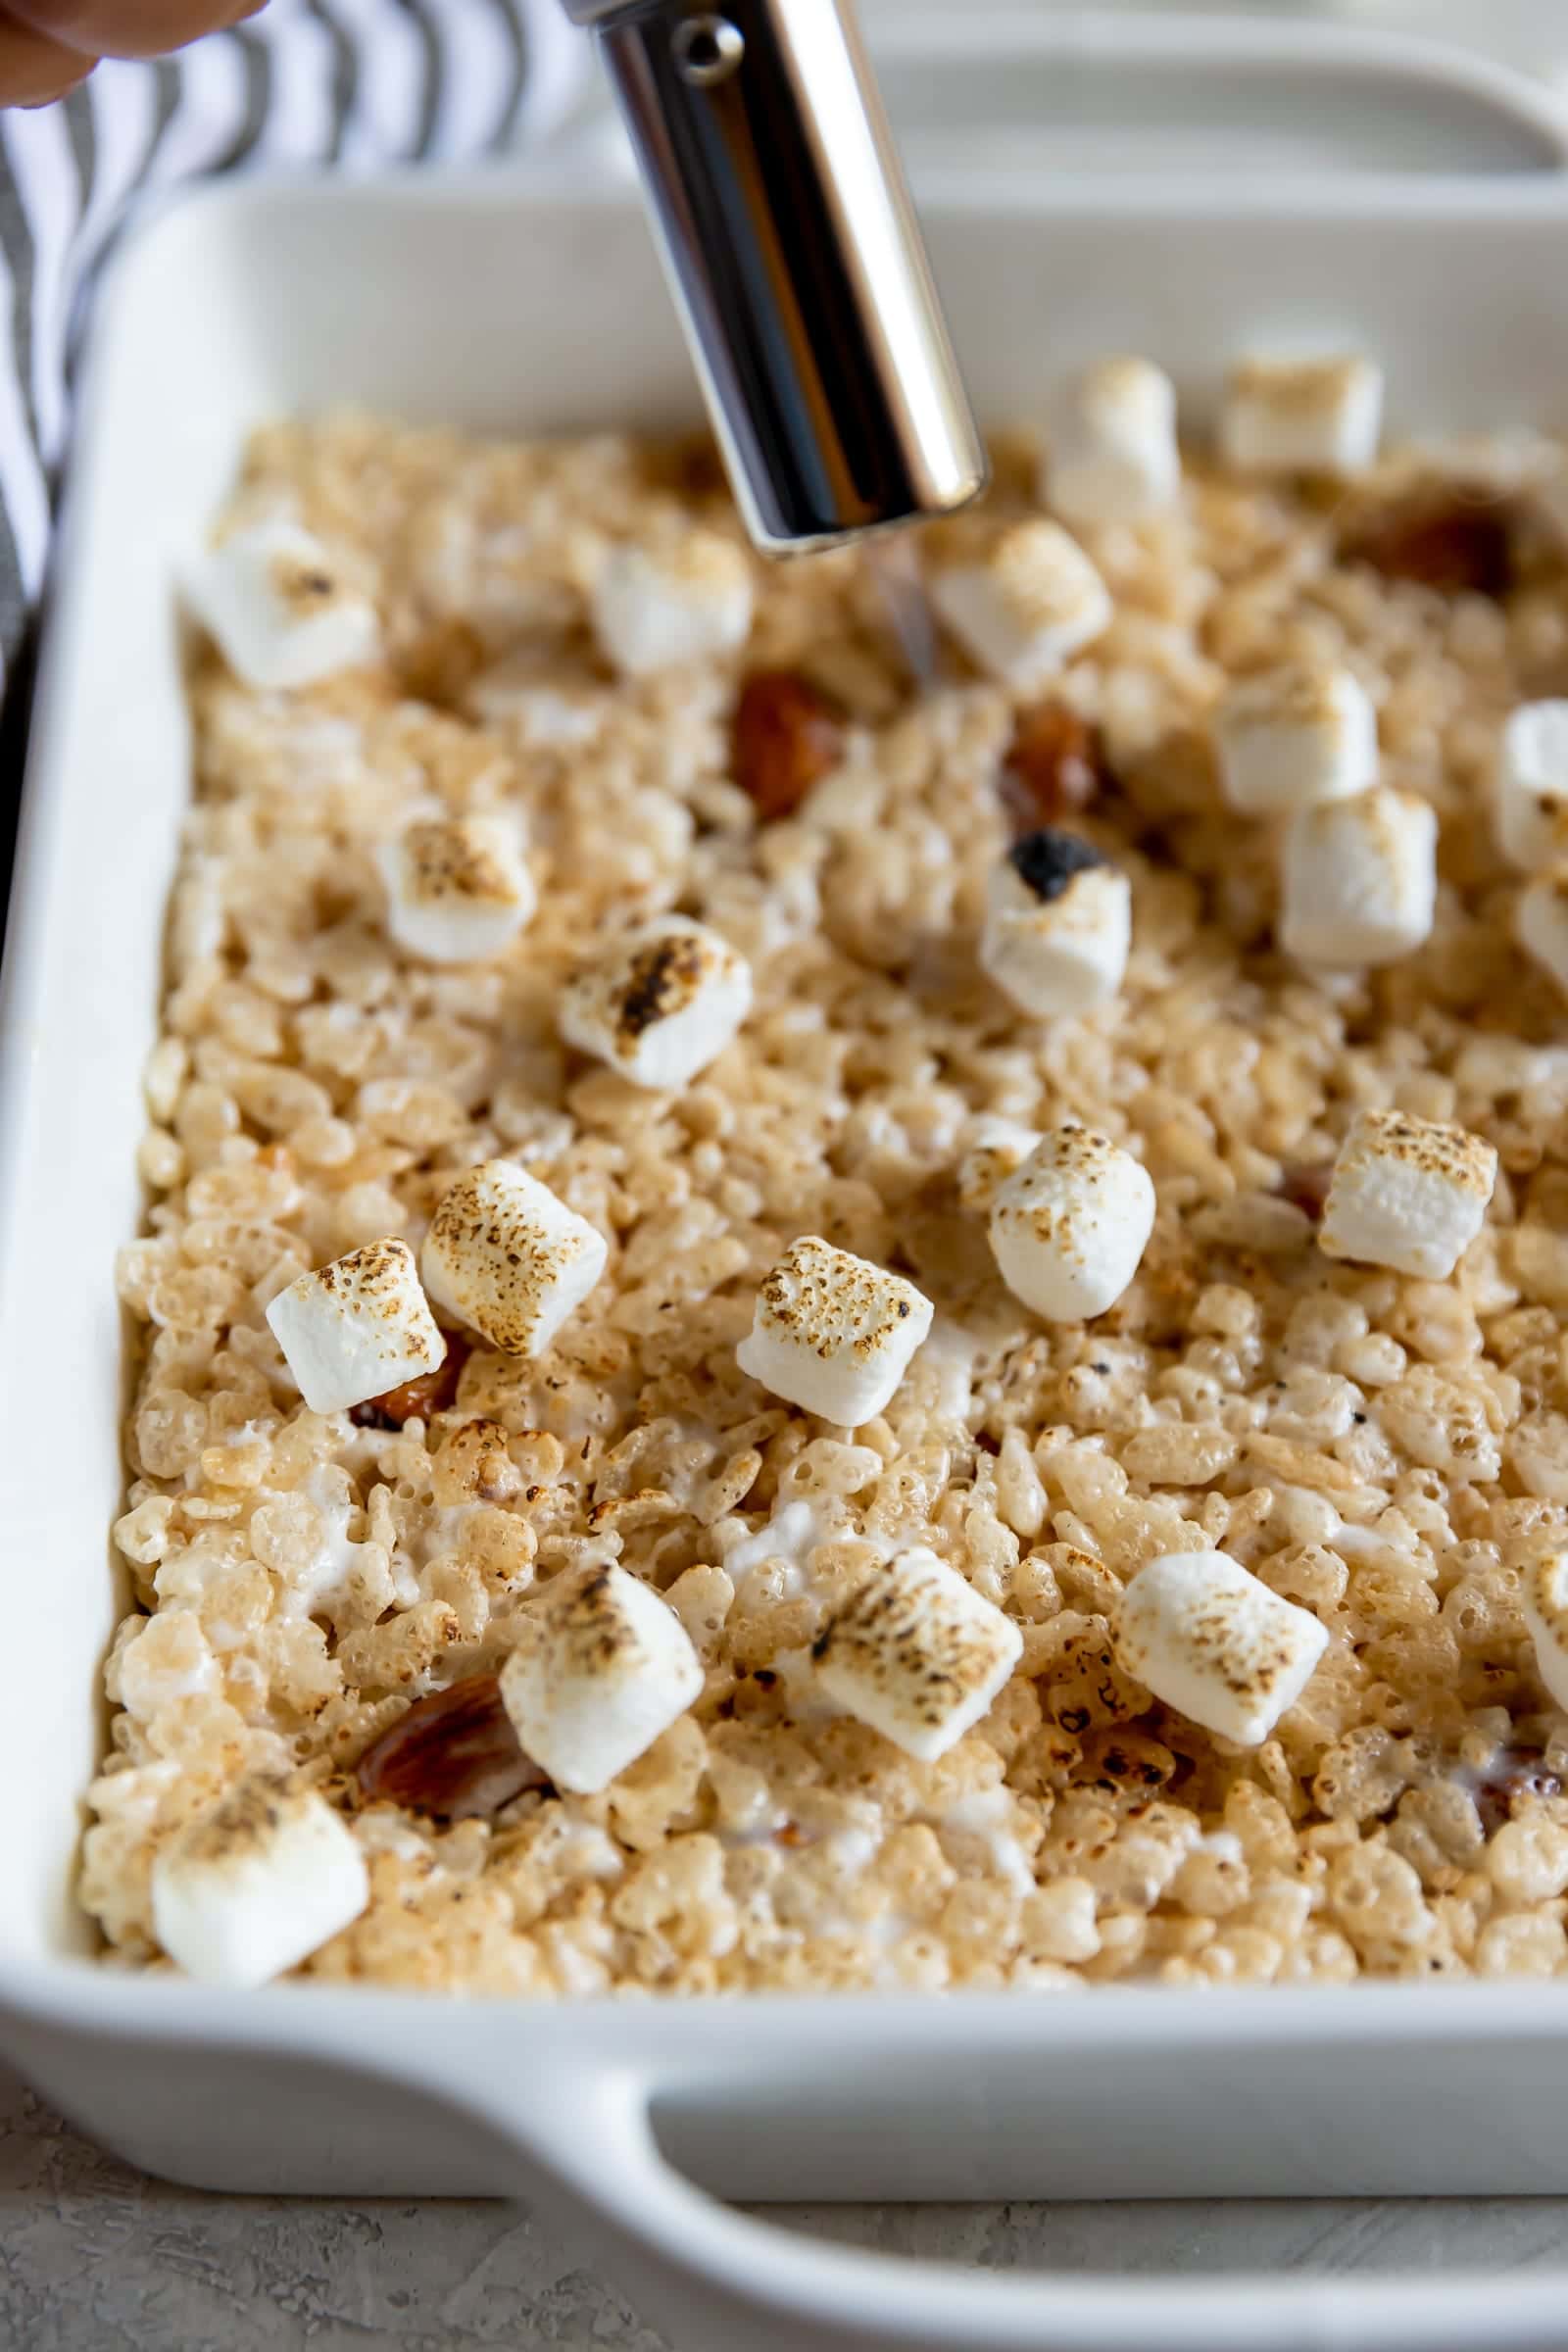 A sweet crispy classic treat with a smoky twist! Rice cereal, torched marshmallows, and smoked almonds come together to make Smoky Rice Krispie Treats.